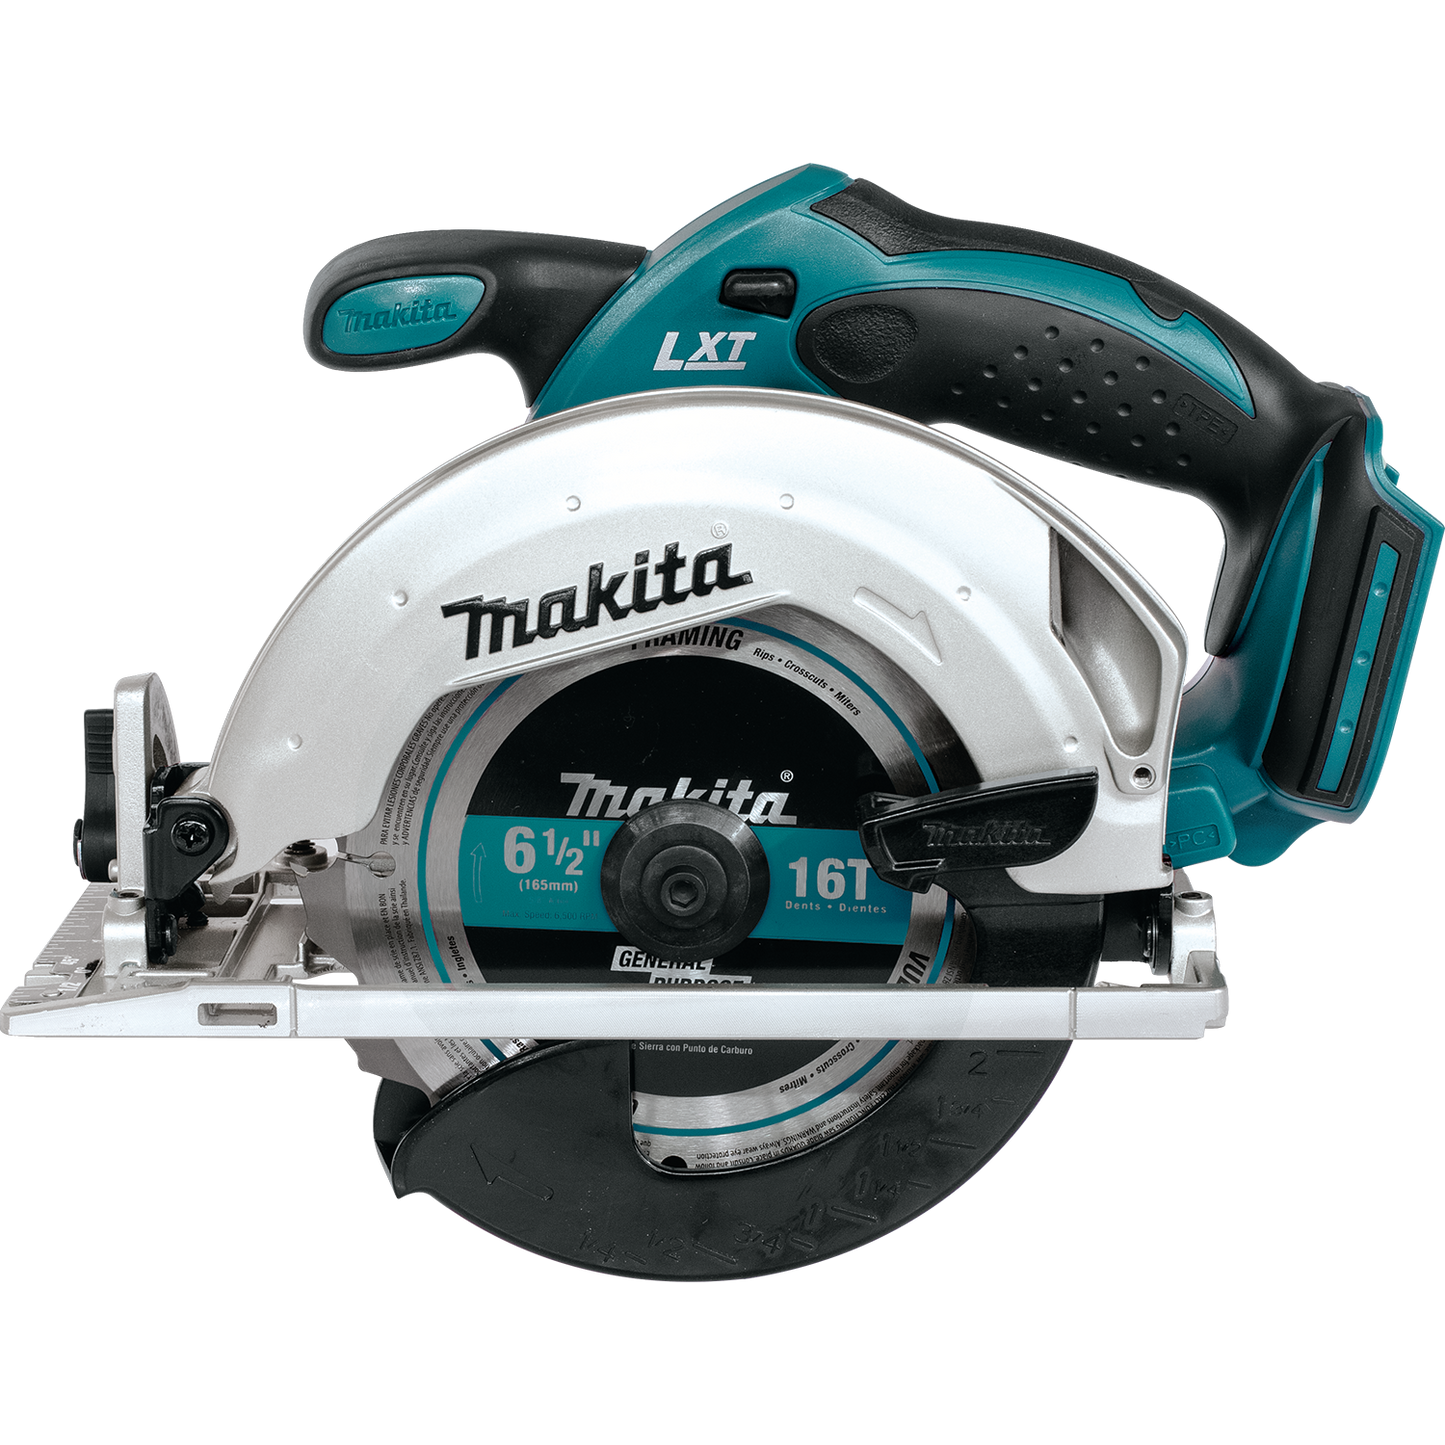 Makita 18 Volt LXT 6 1/2 Inch Saw Tool Only Factory Serviced (Tool Only)